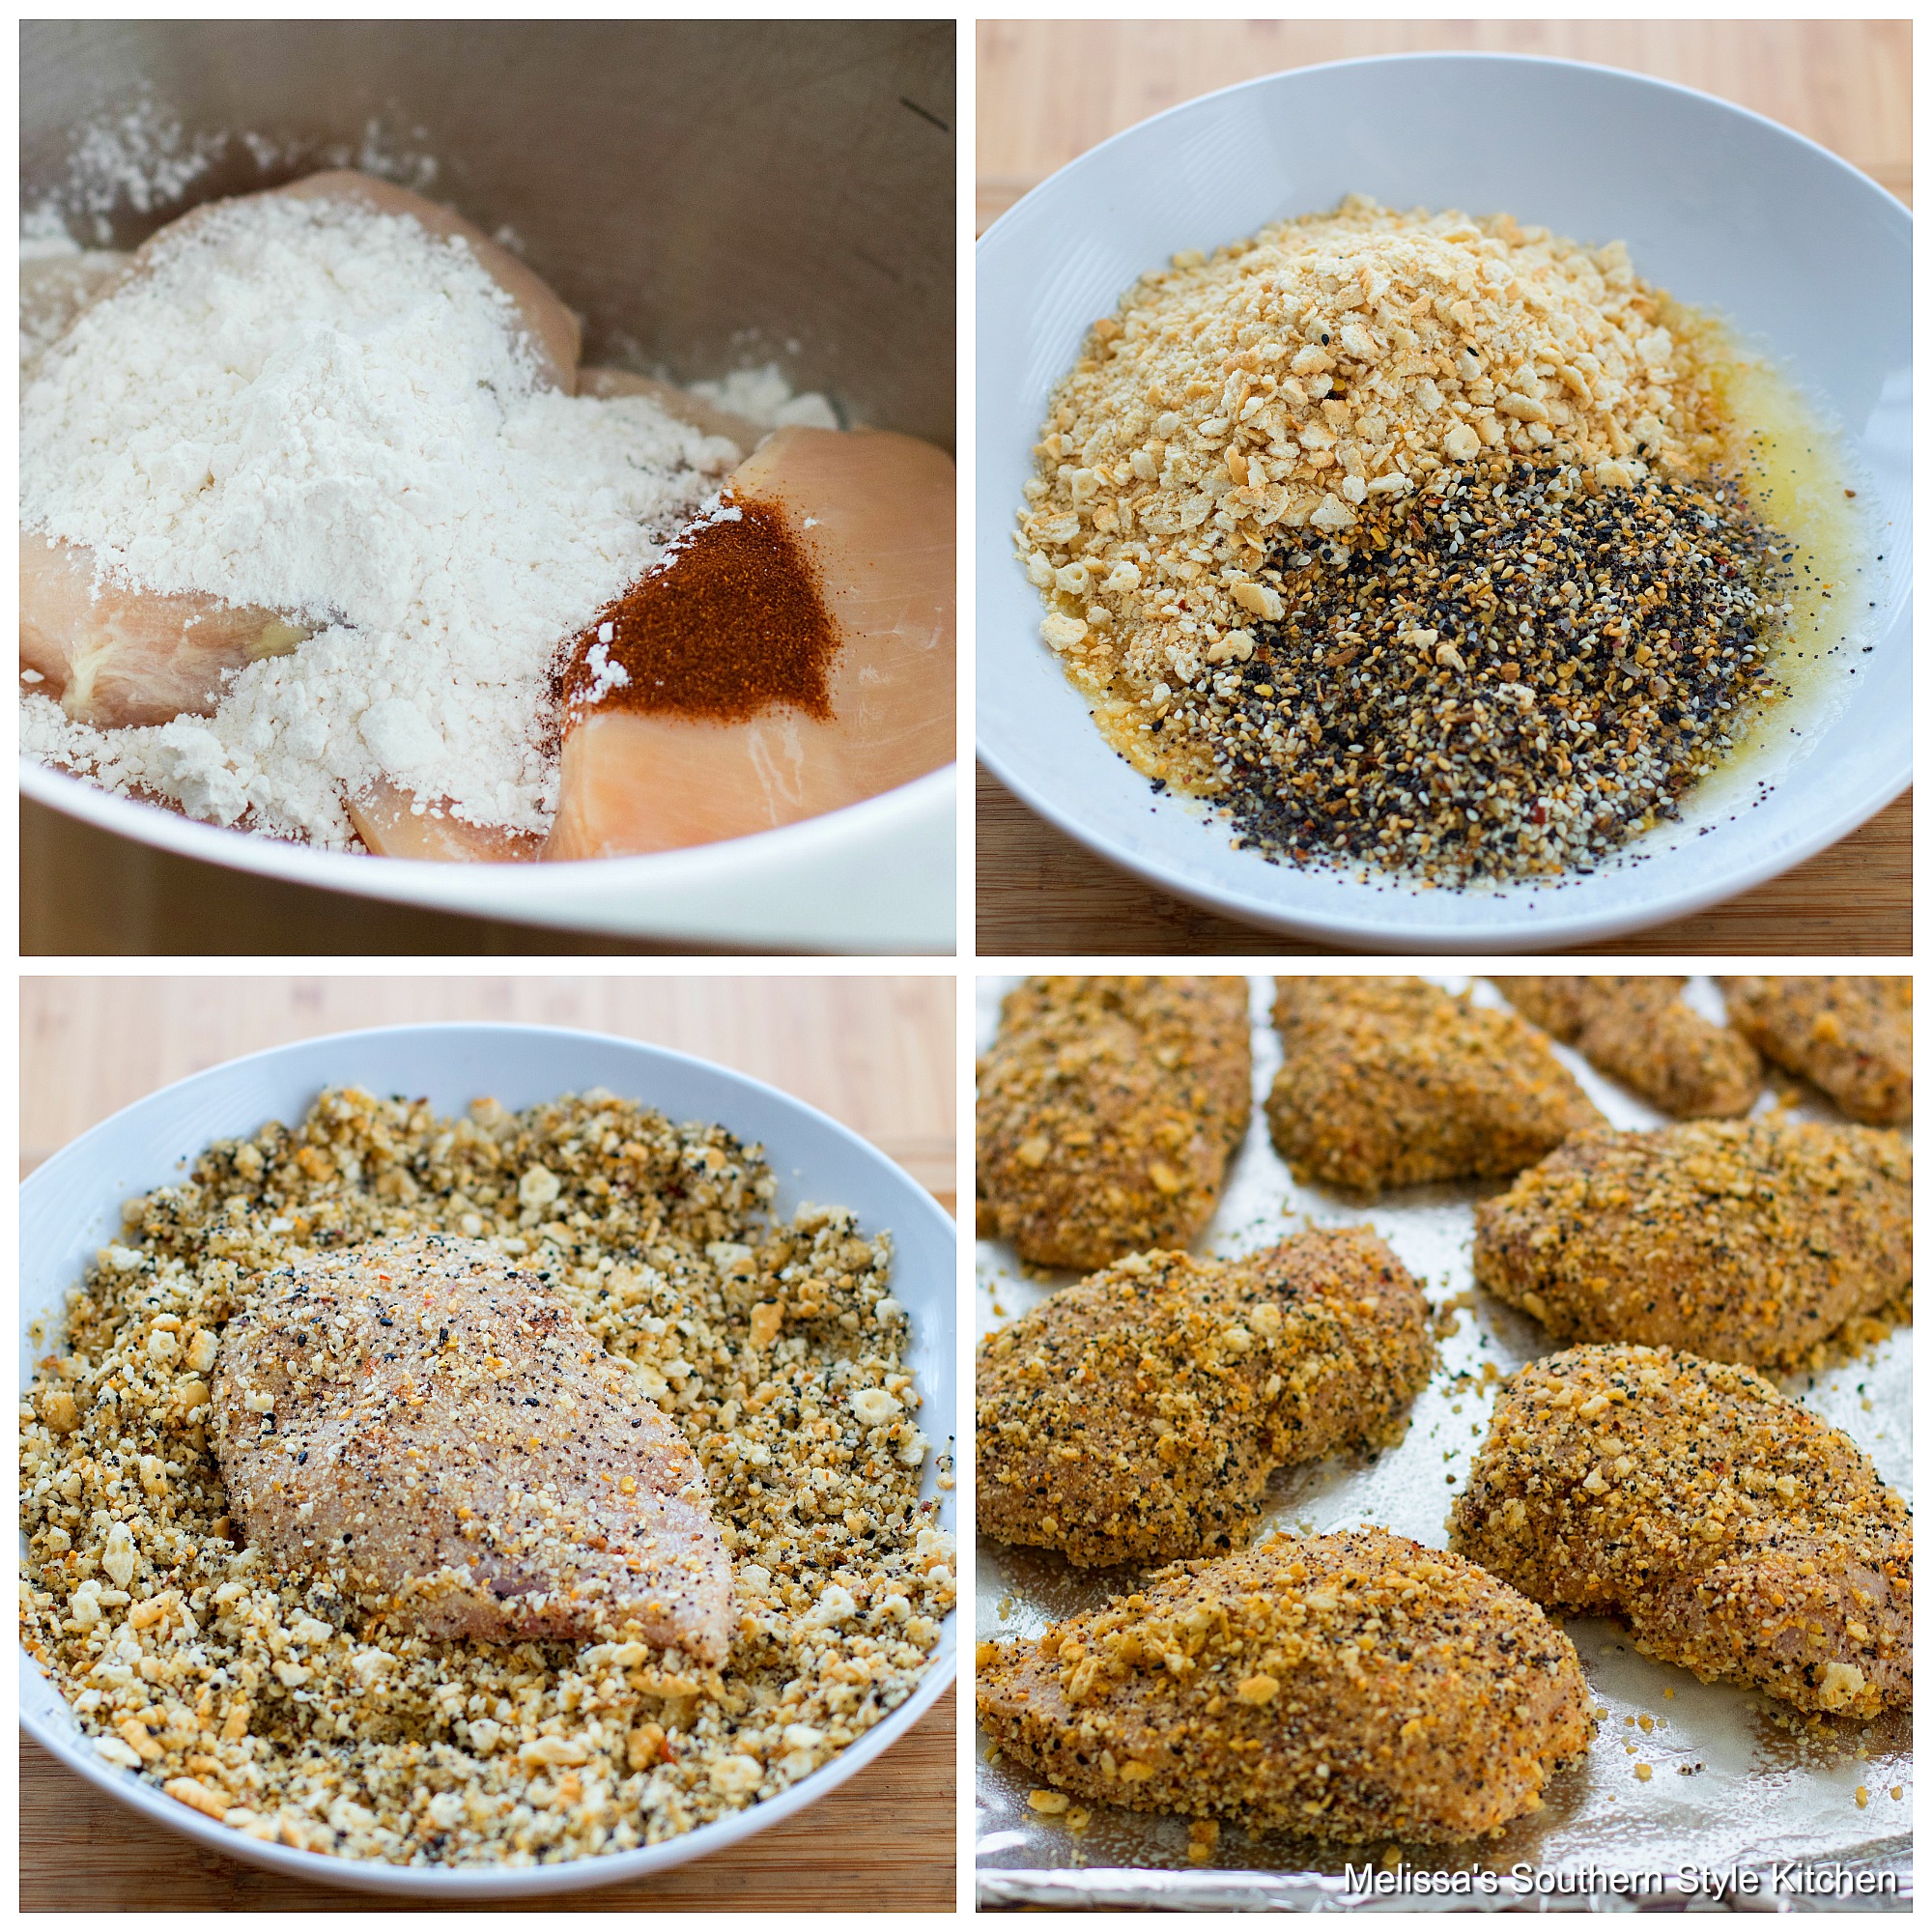 Step-by-step preparation images and ingredients for Everything Bagel Chicken